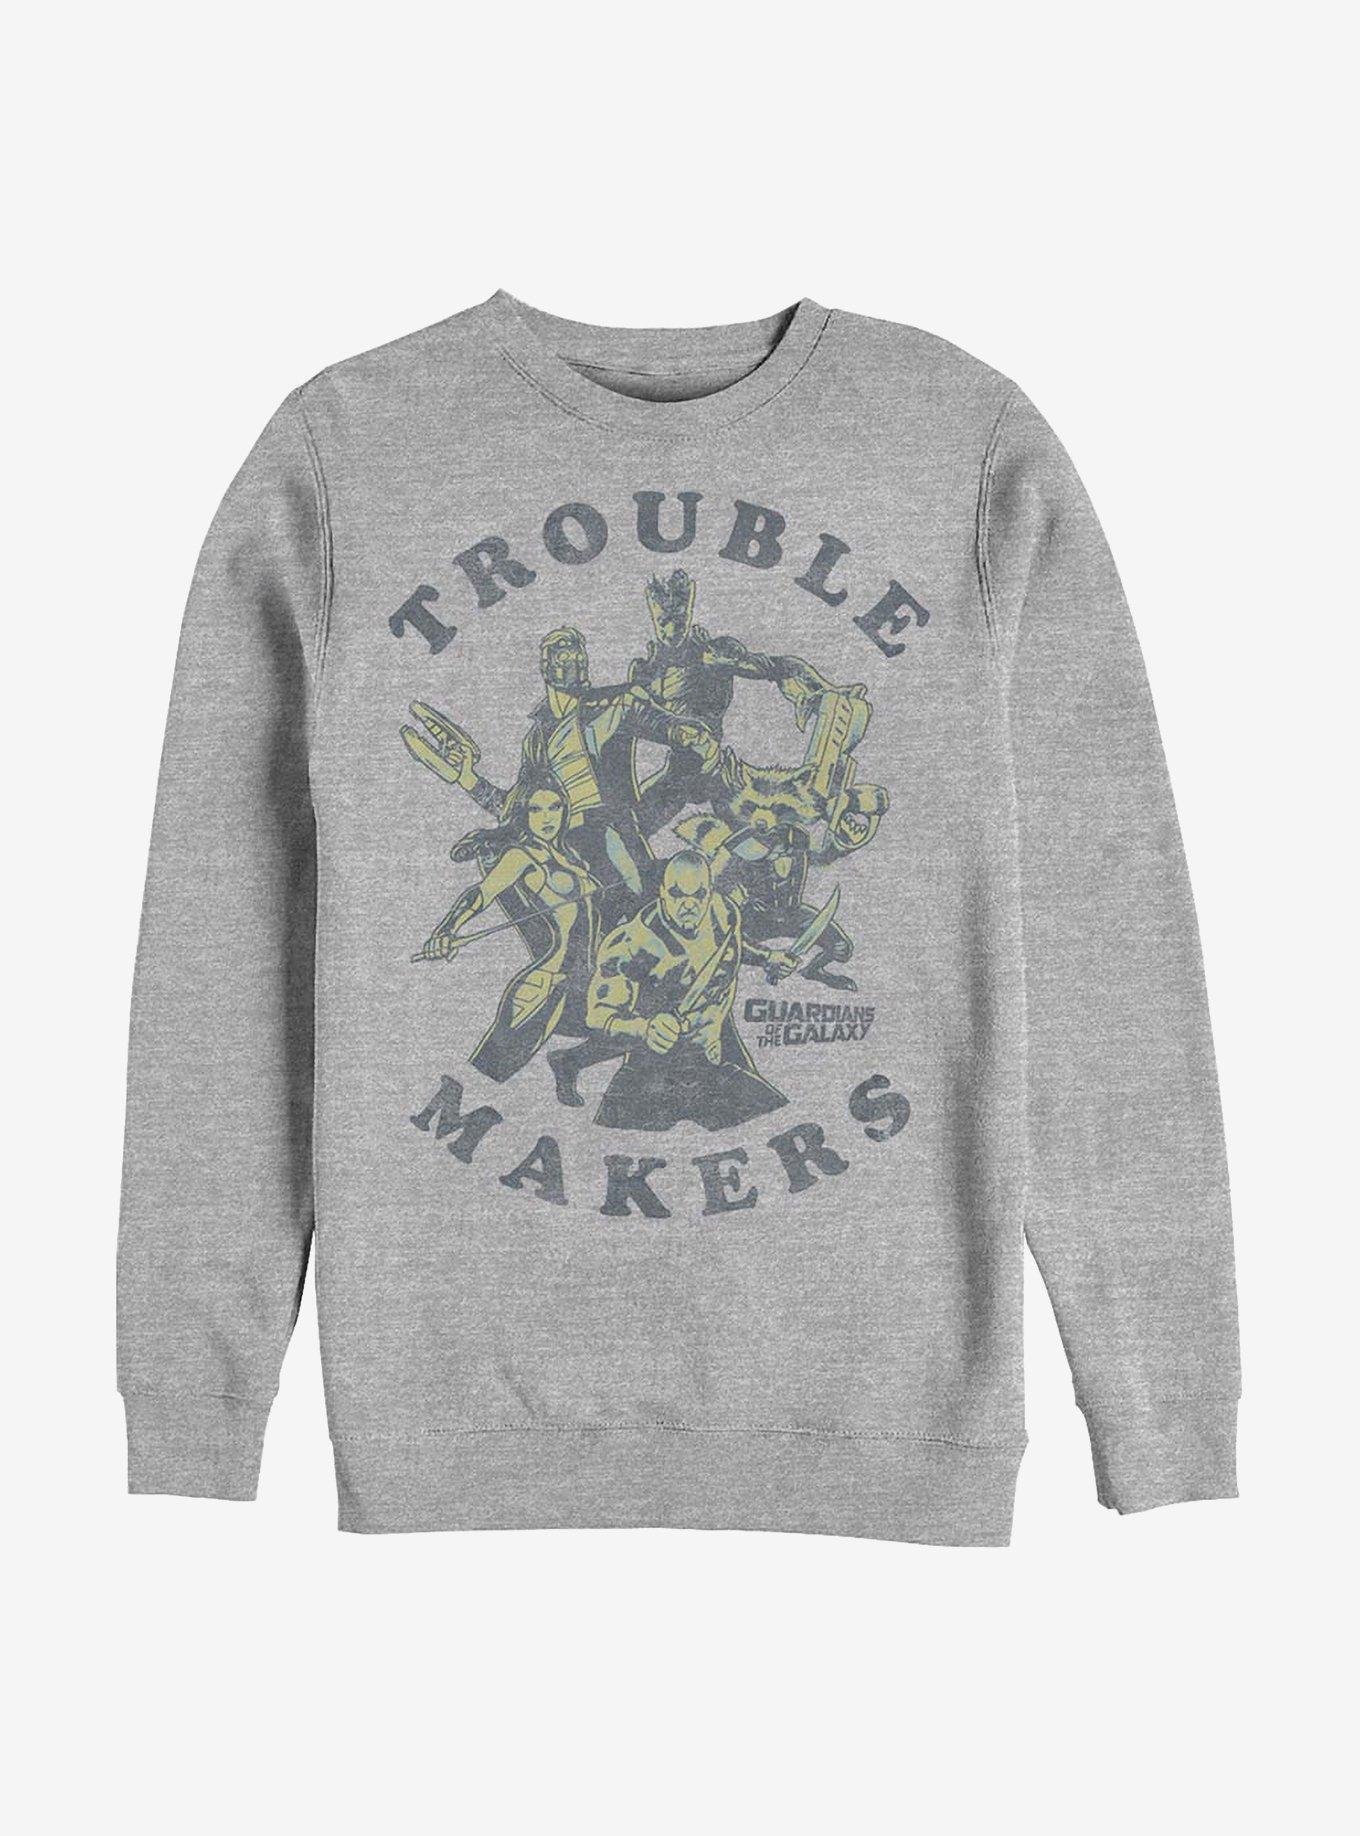 Marvel Guardians Of The Galaxy Trouble Makers Crew Sweatshirt